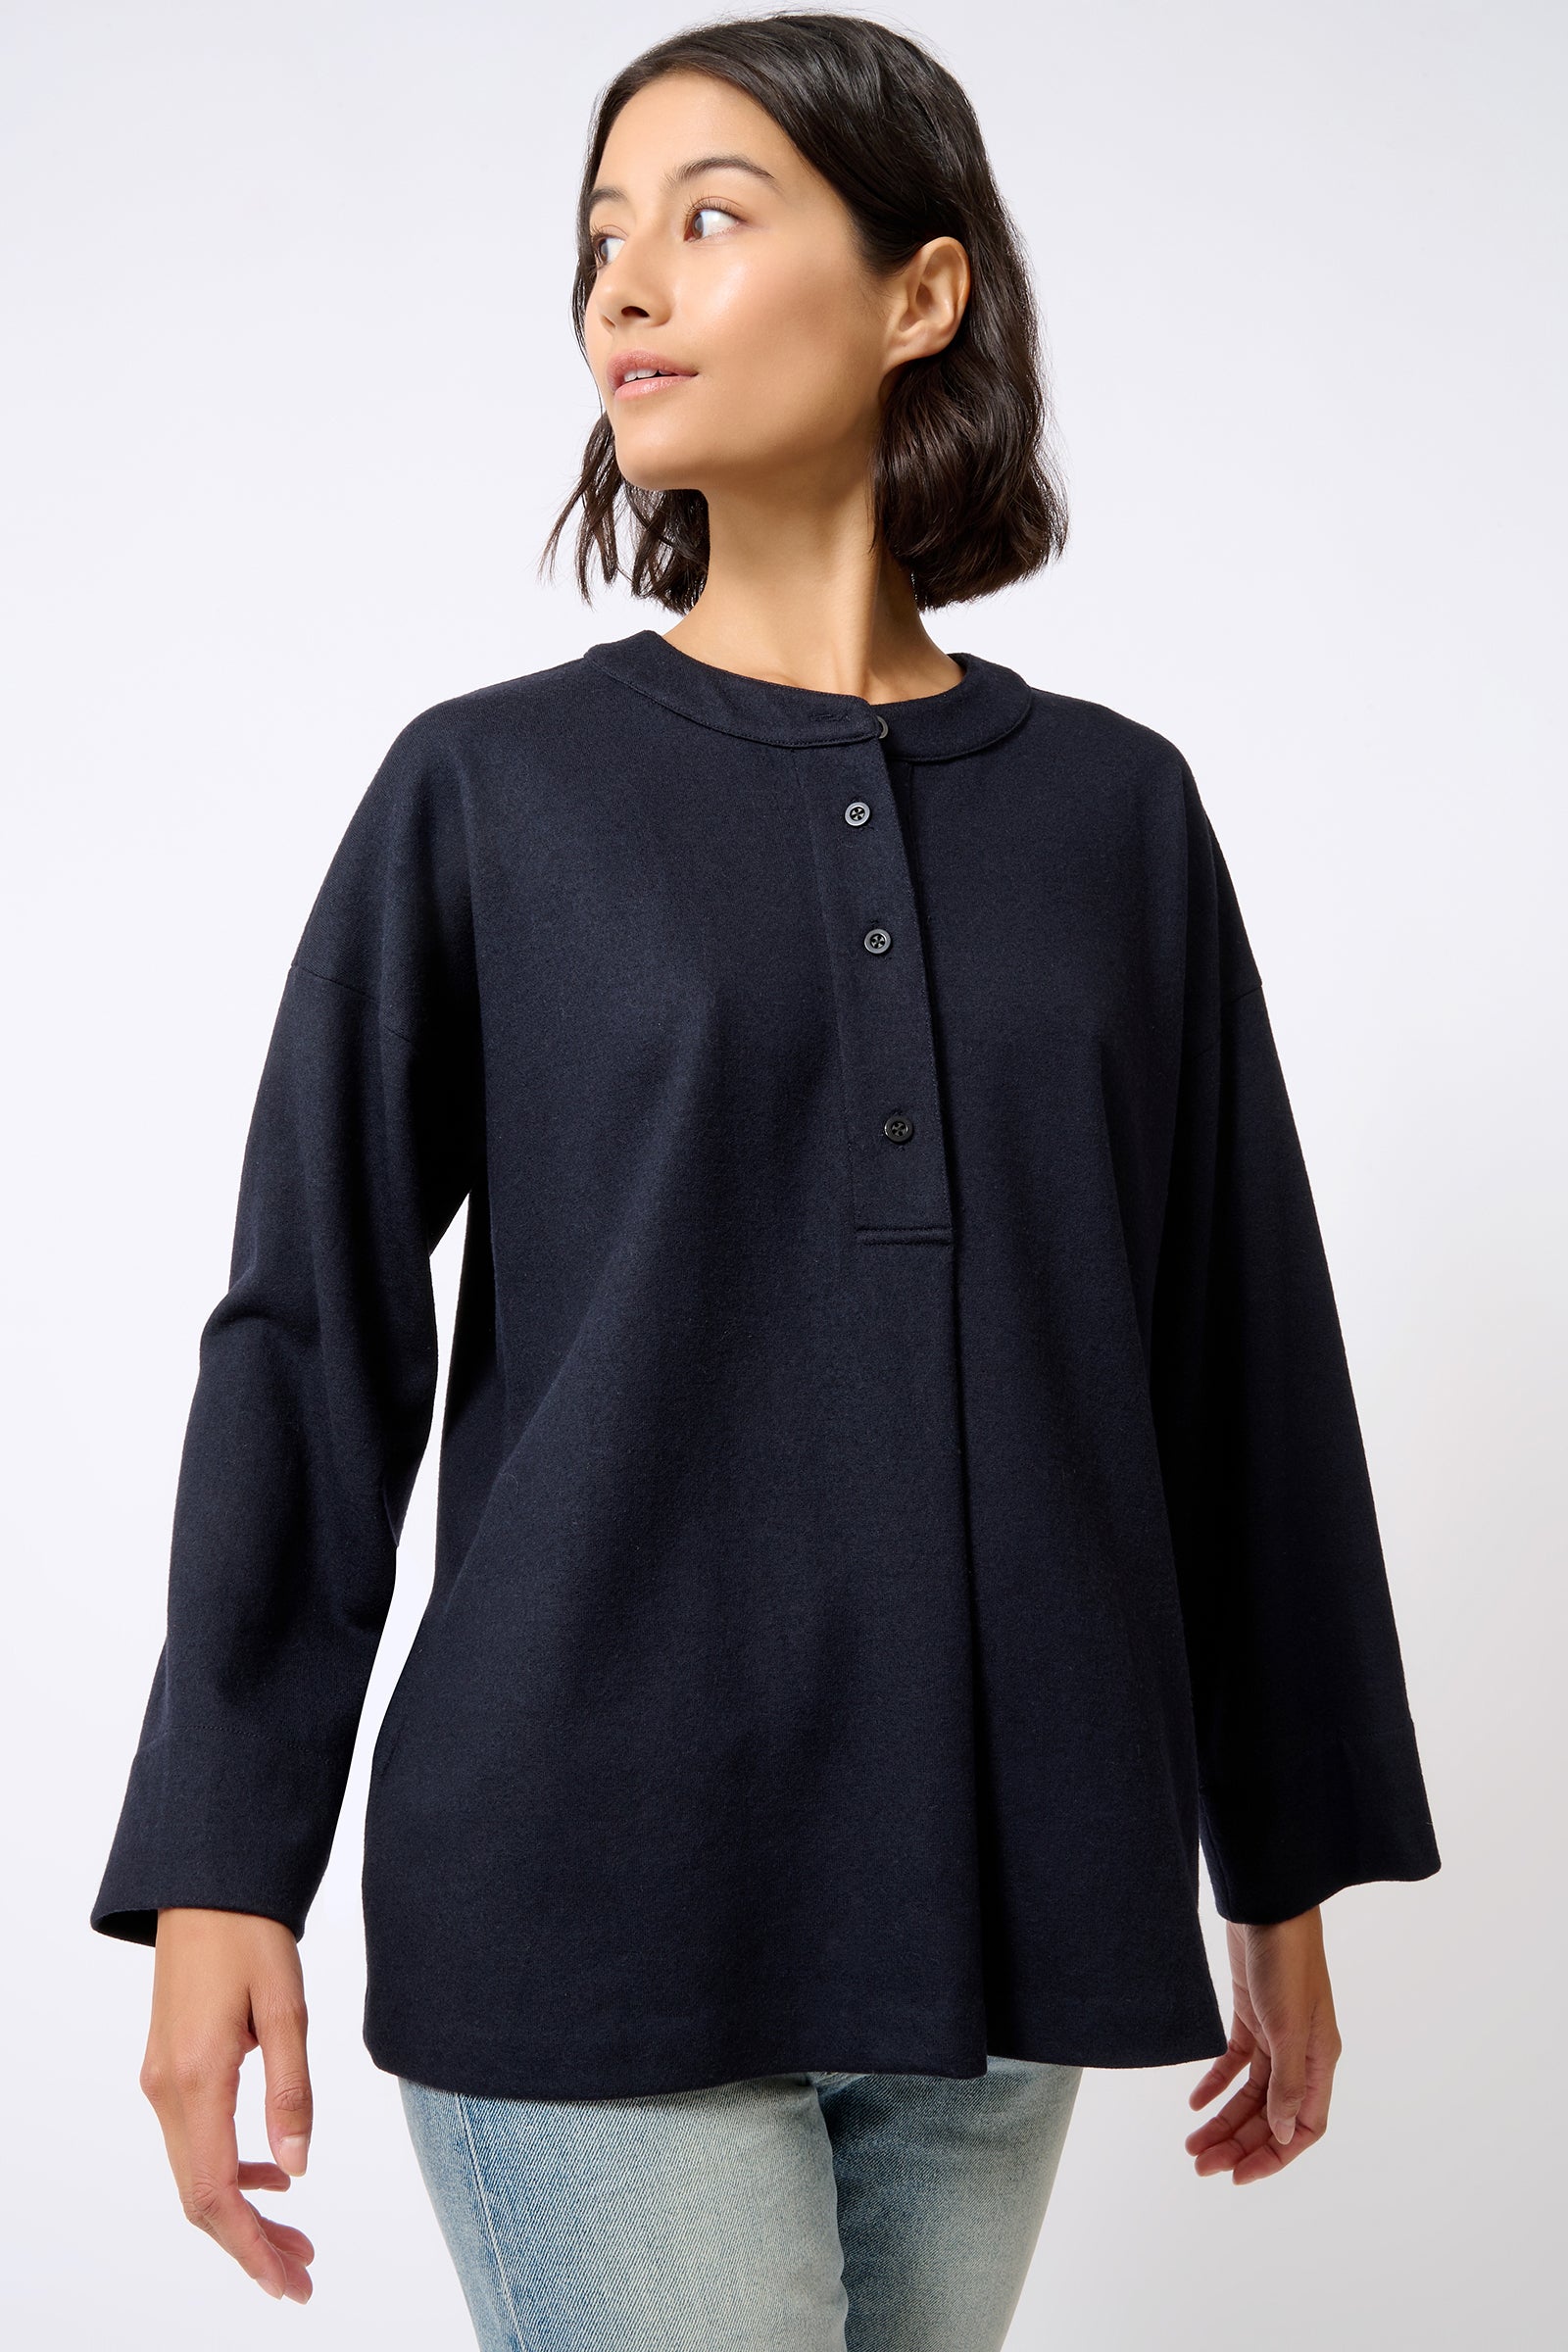 Kal Rieman Band Collar Top in Midnight on Model Looking Right Front View